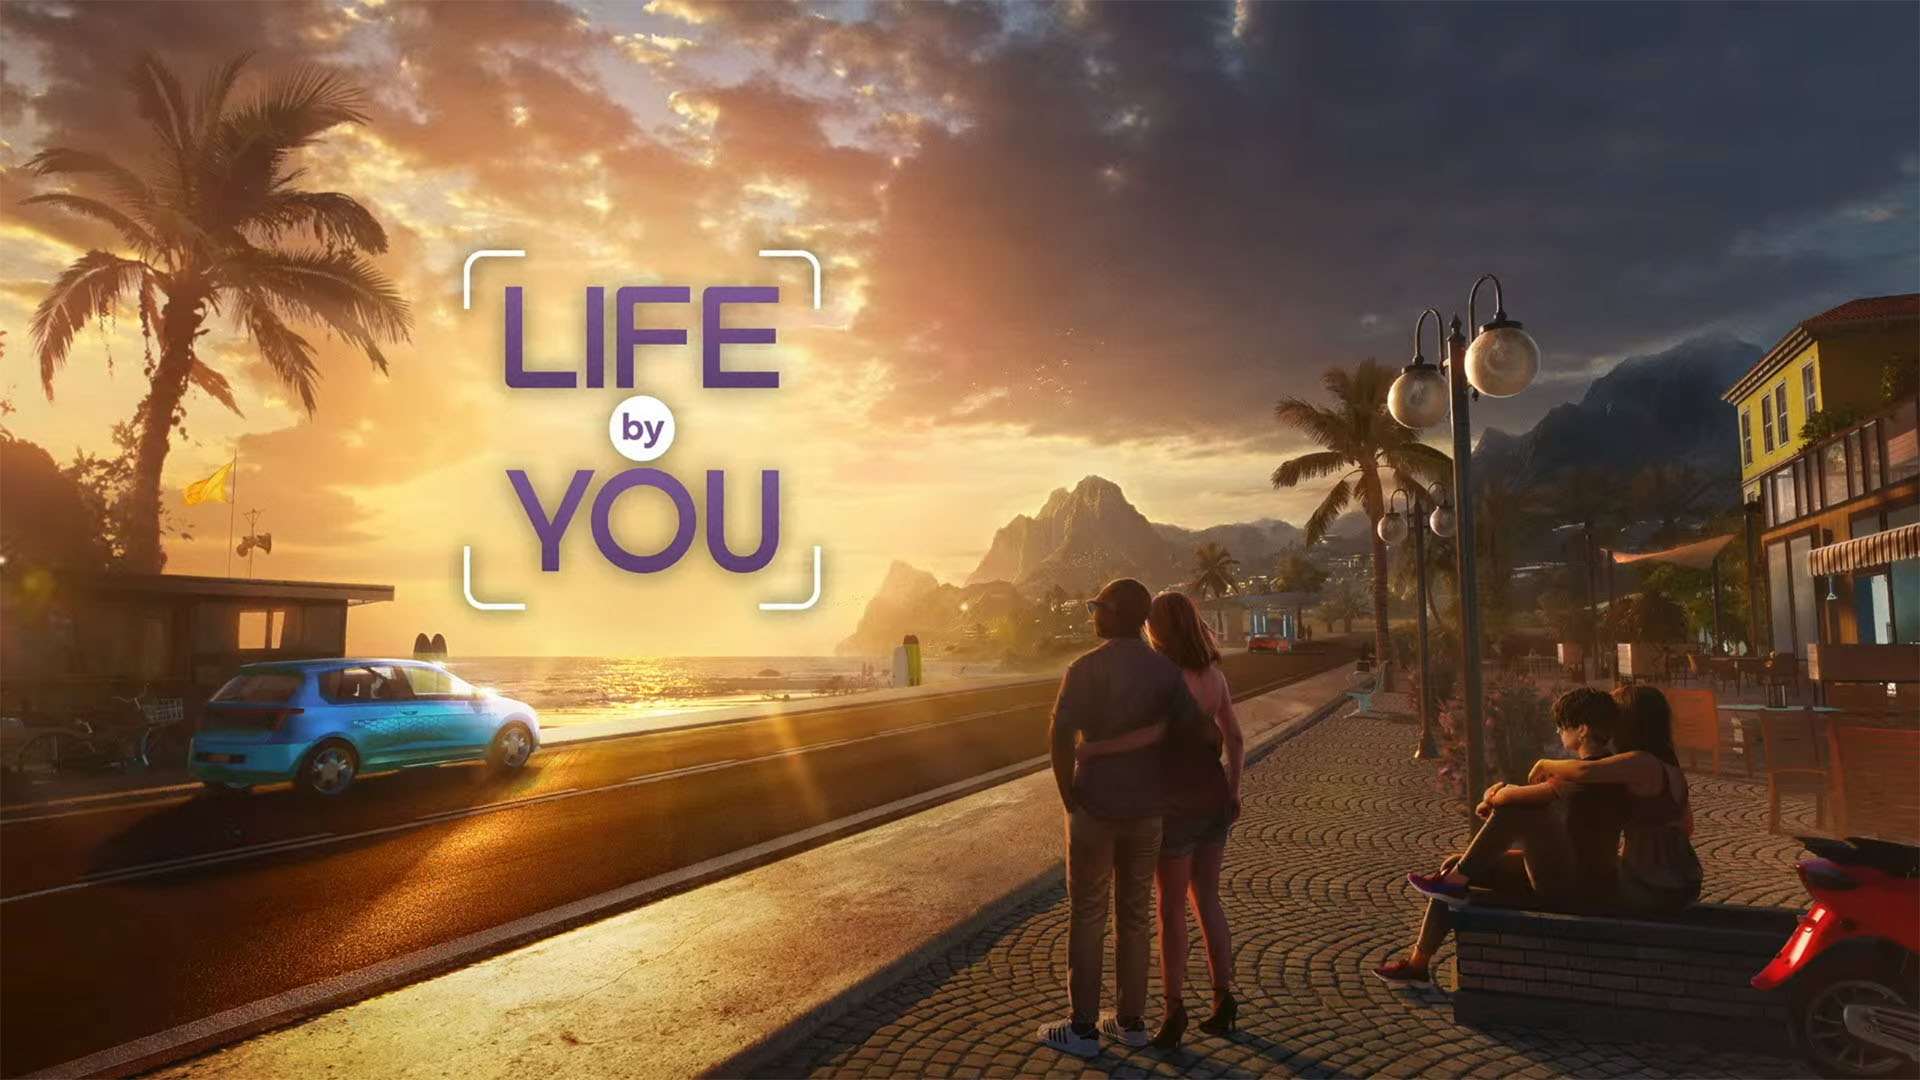 The Sims creator’s new game Life by You gets September early access launch